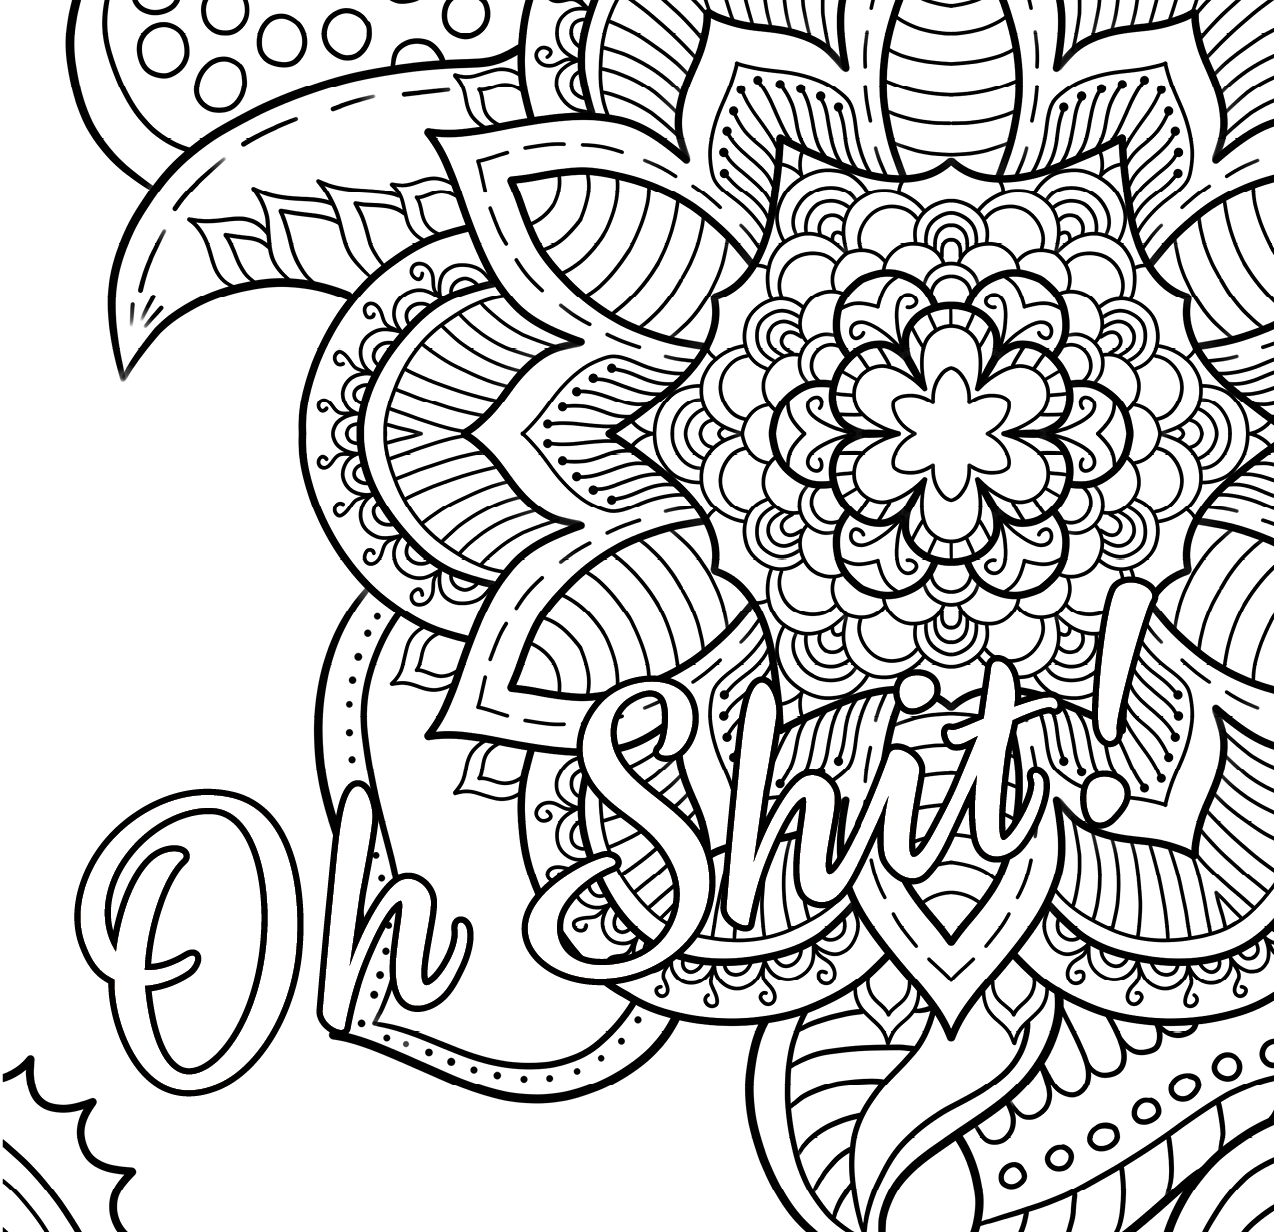 curse word coloring pages